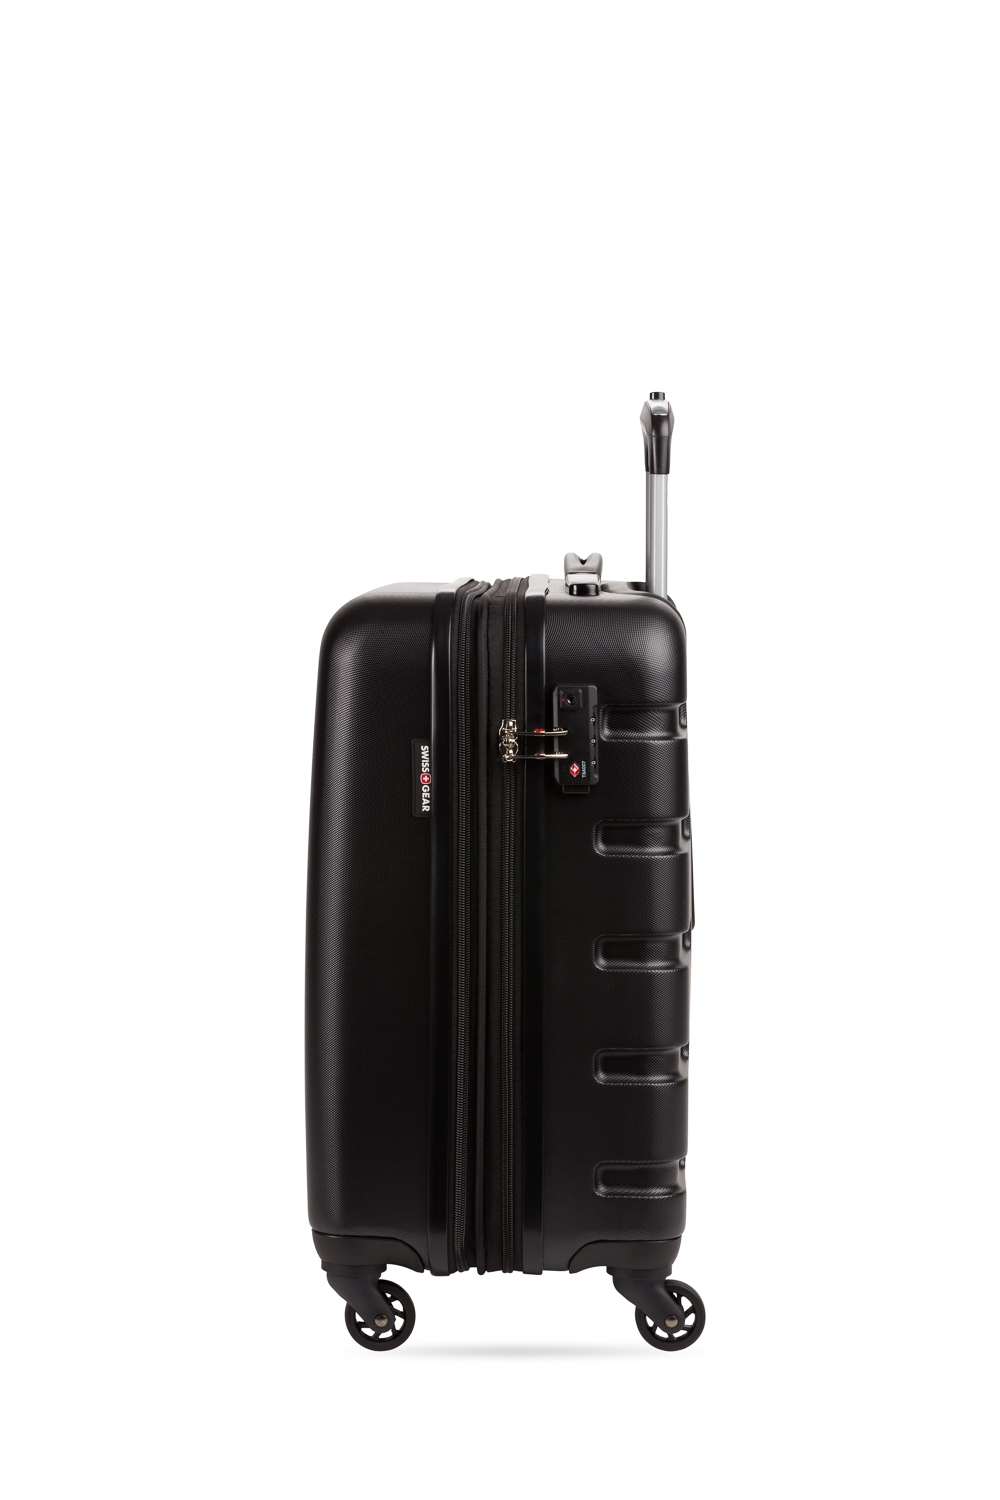 SWISSGEAR 7366 Hardside Expandable Luggage with Spinner Wheels Carry-On, Black 